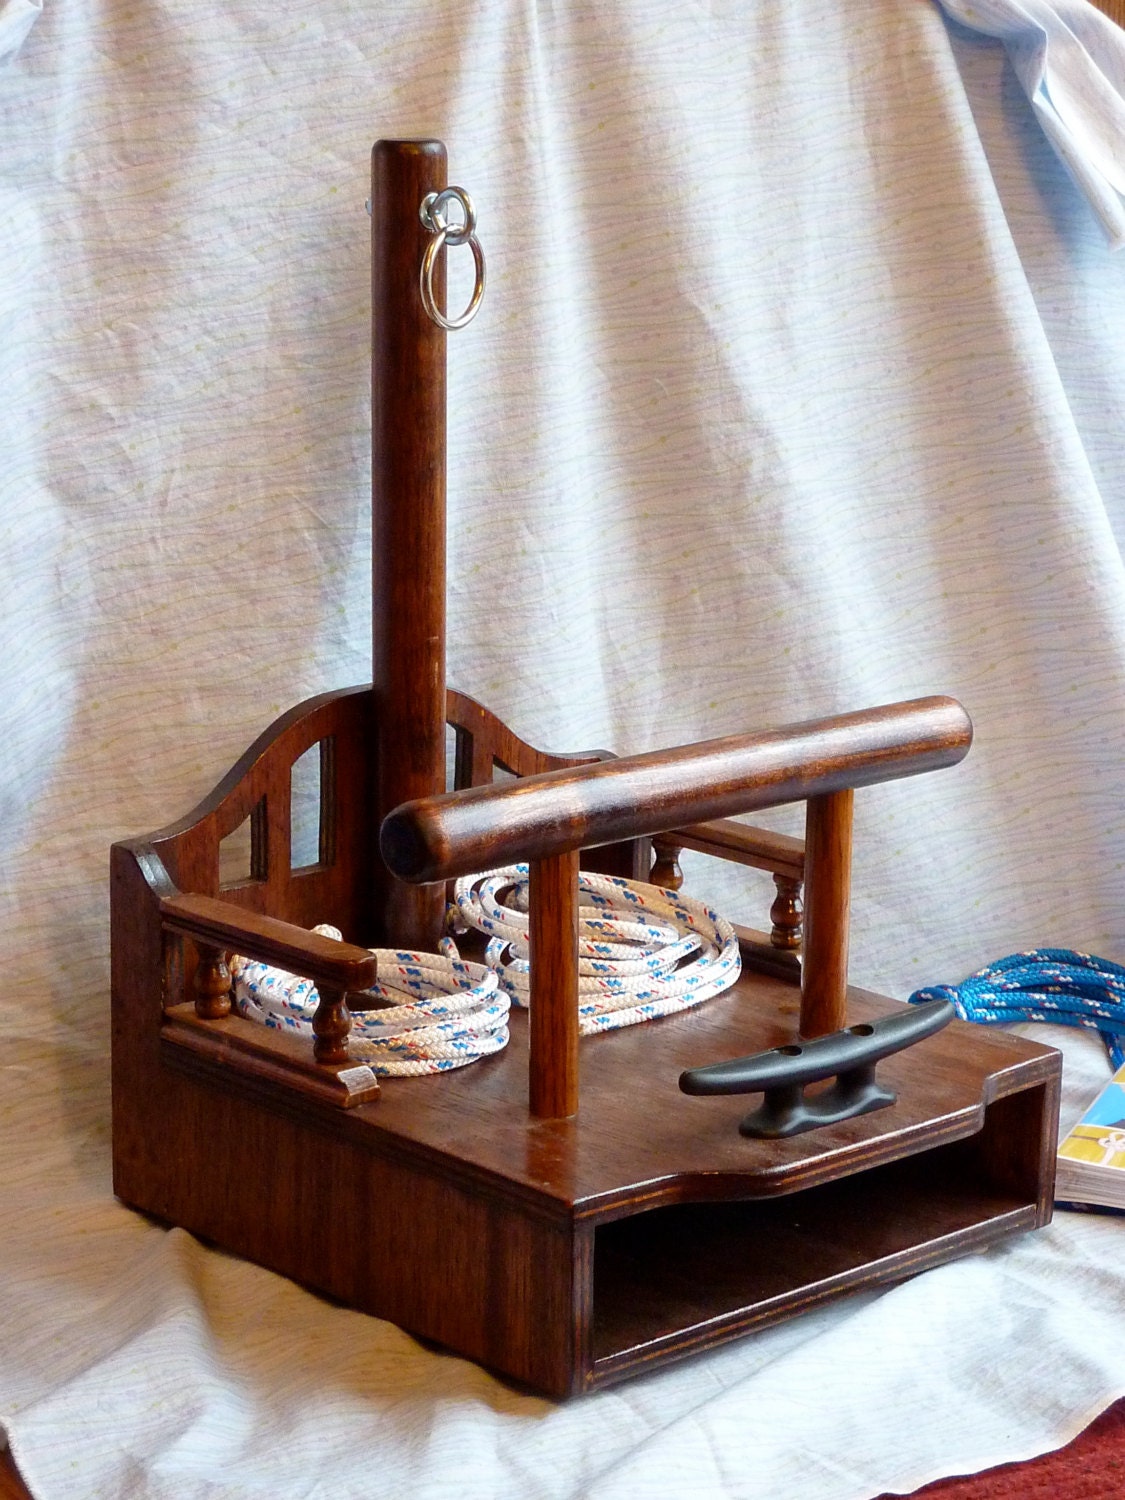 Deluxe Decorative Knot Tying Station Built Like a Ship's